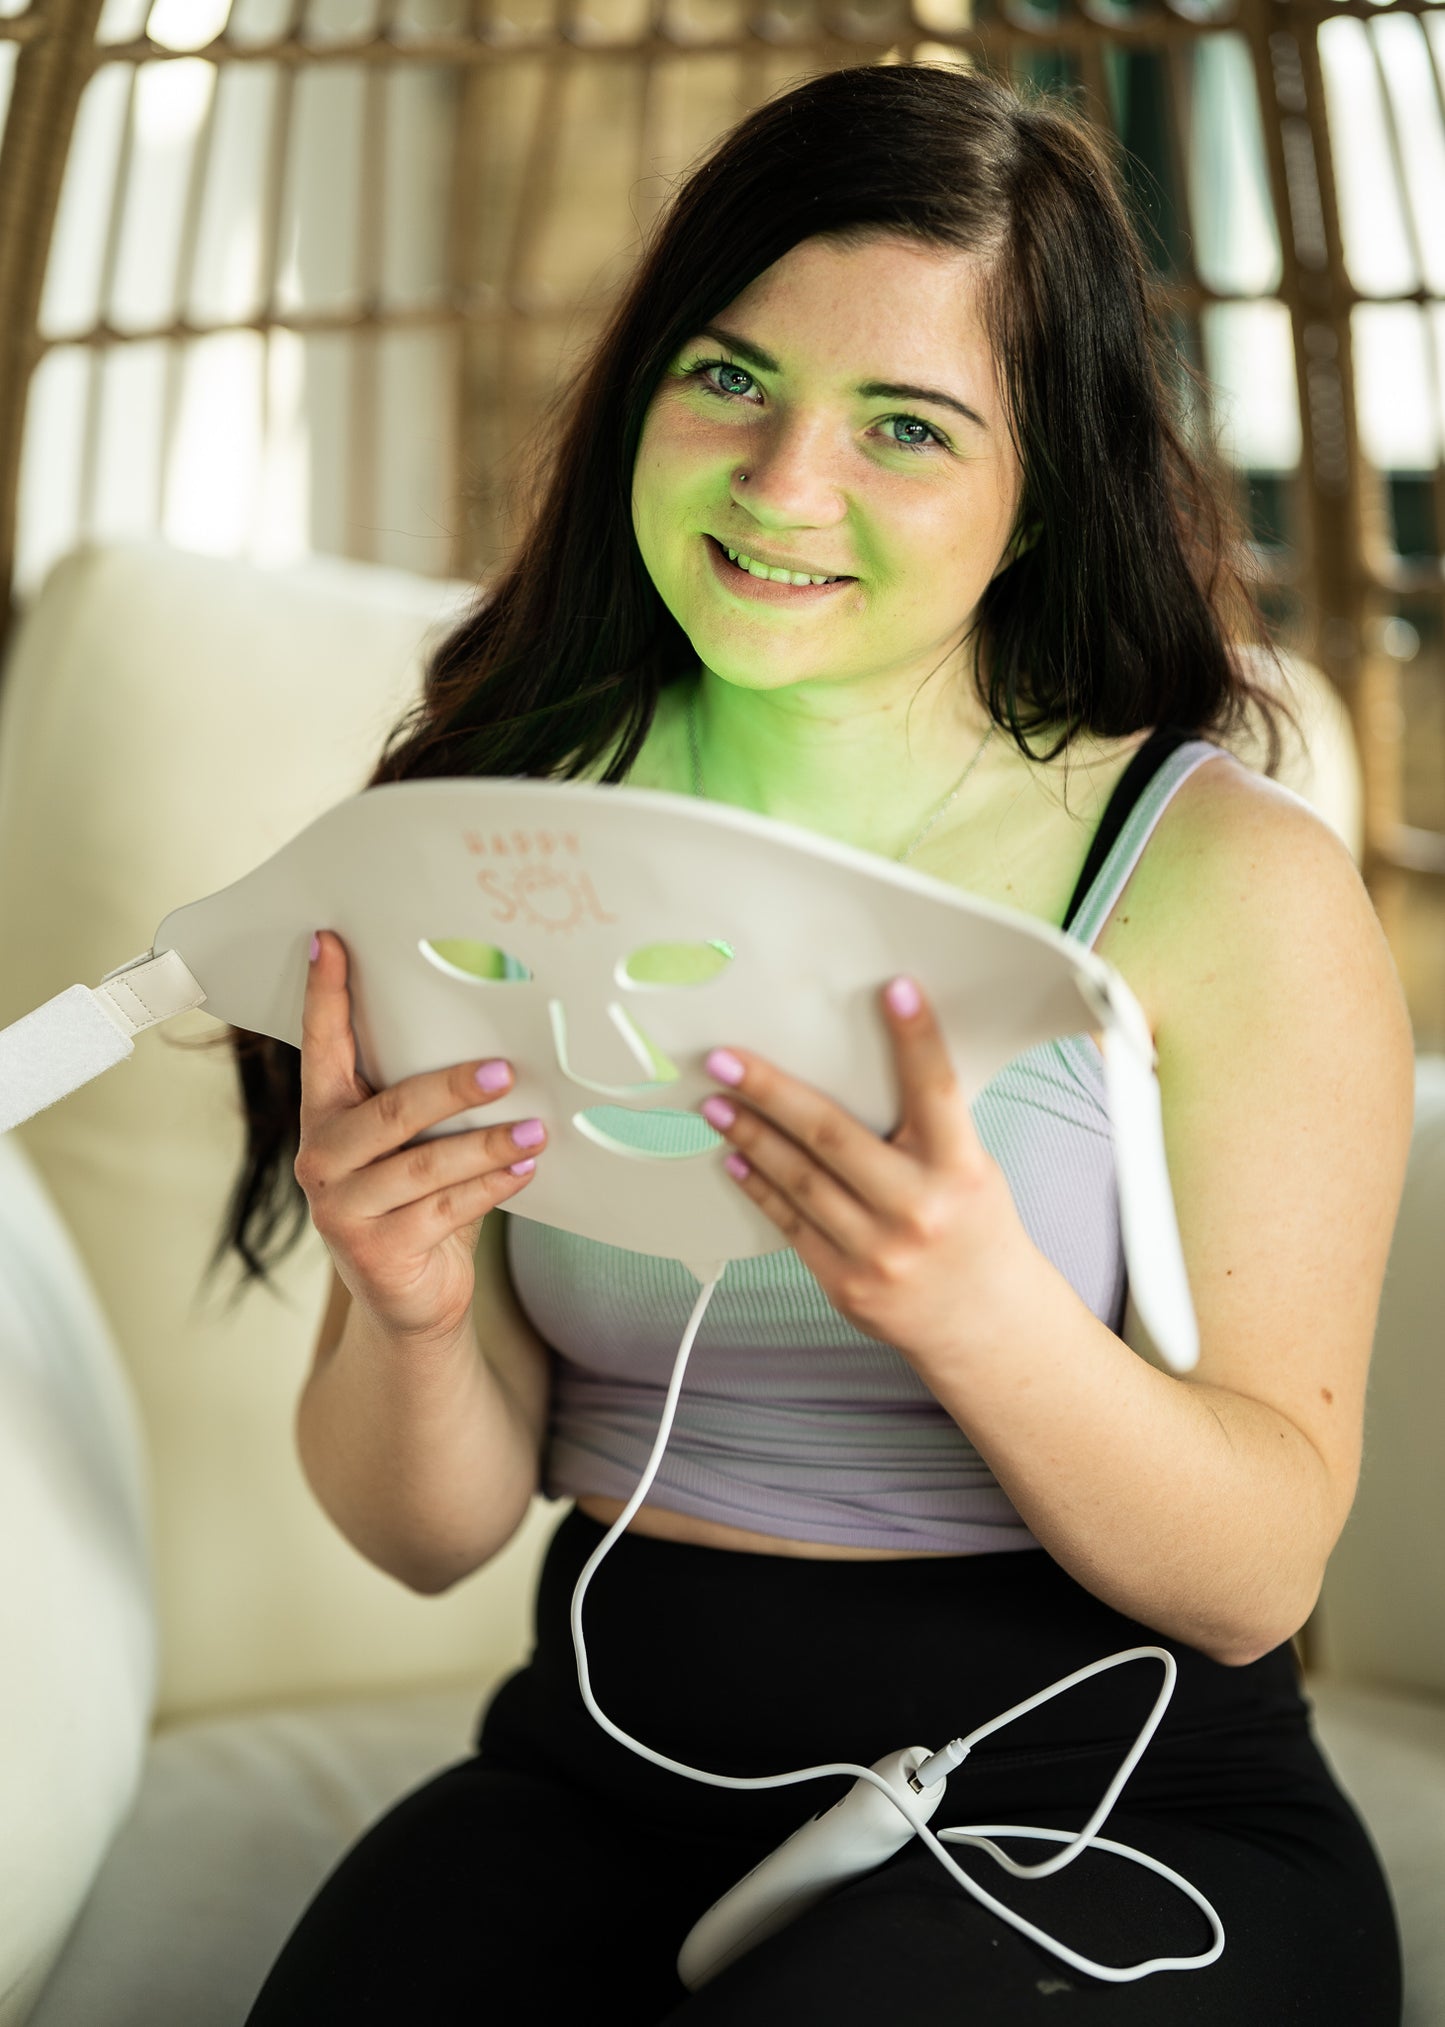 Light Therapy Face Mask